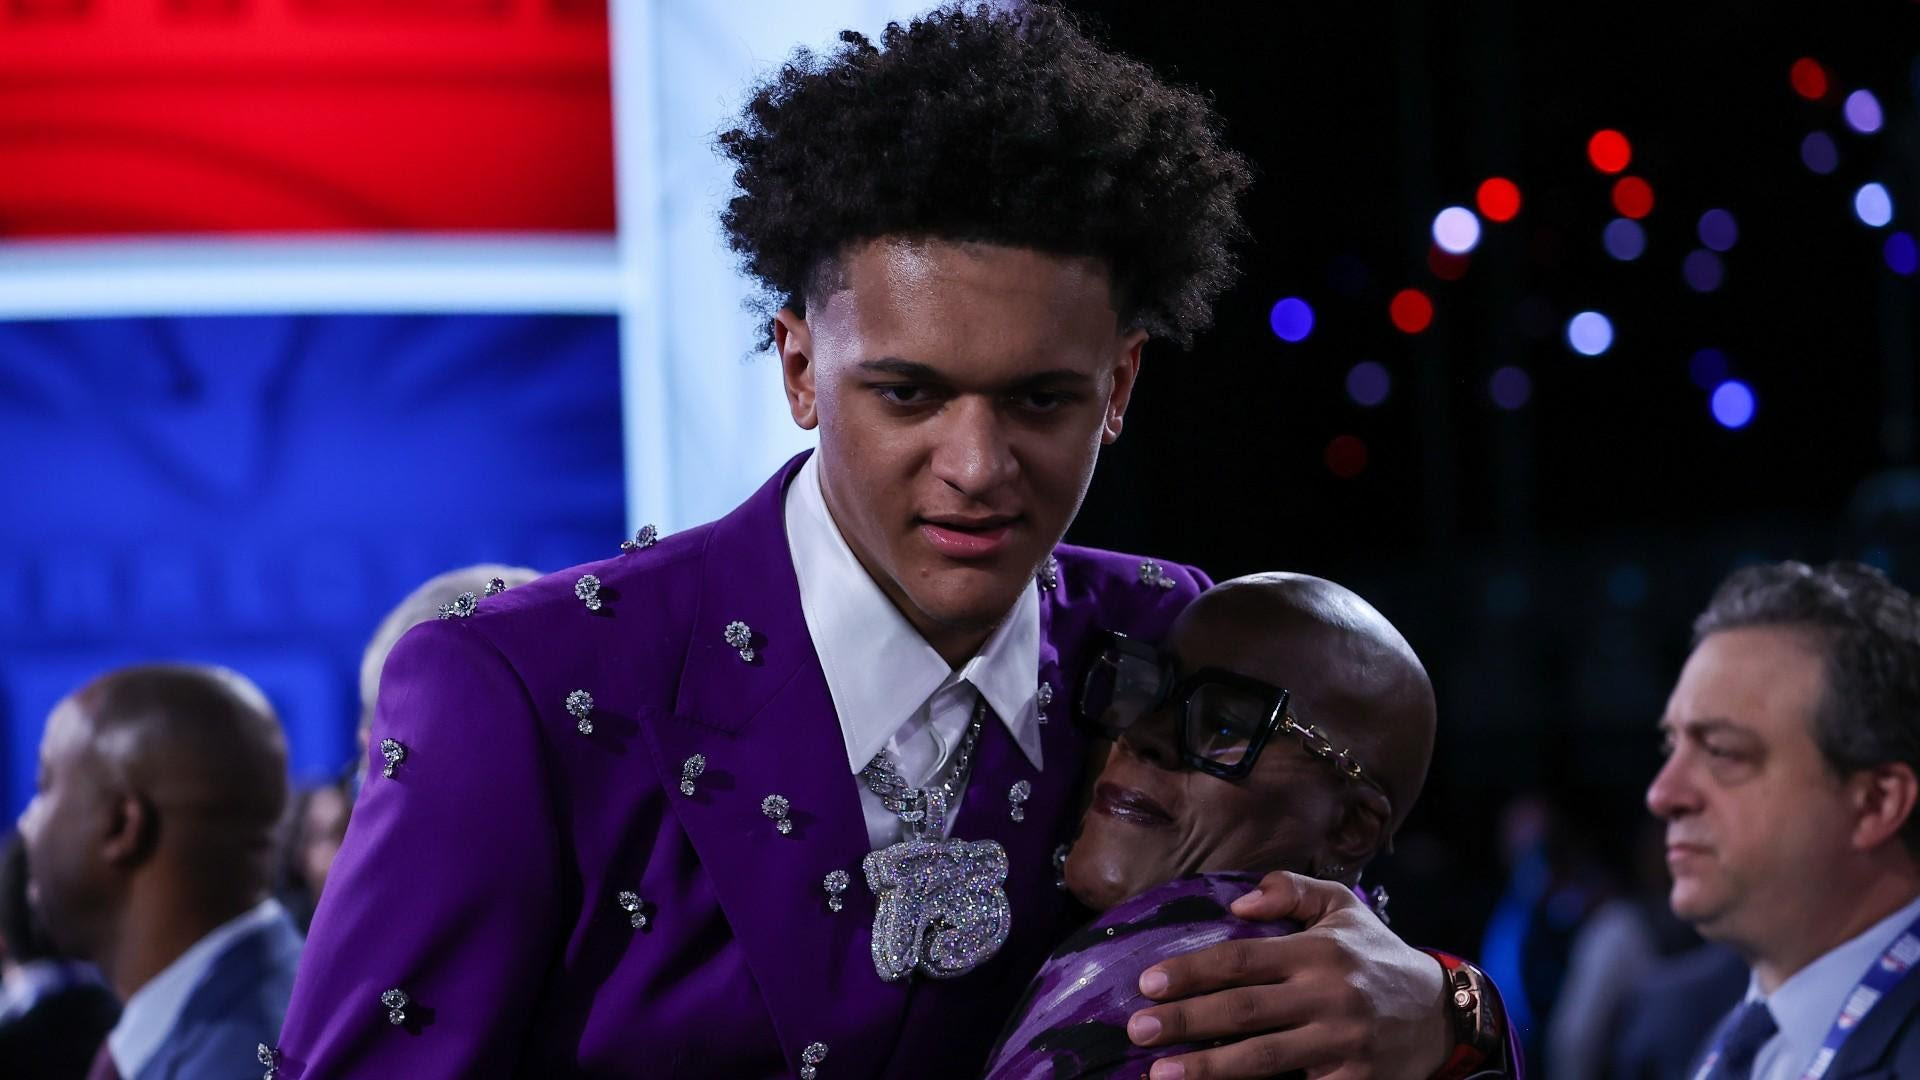 2022 NBA Draft results, takeaways: Magic trick experts by taking Paolo Banchero at No. 1, setting off chaos